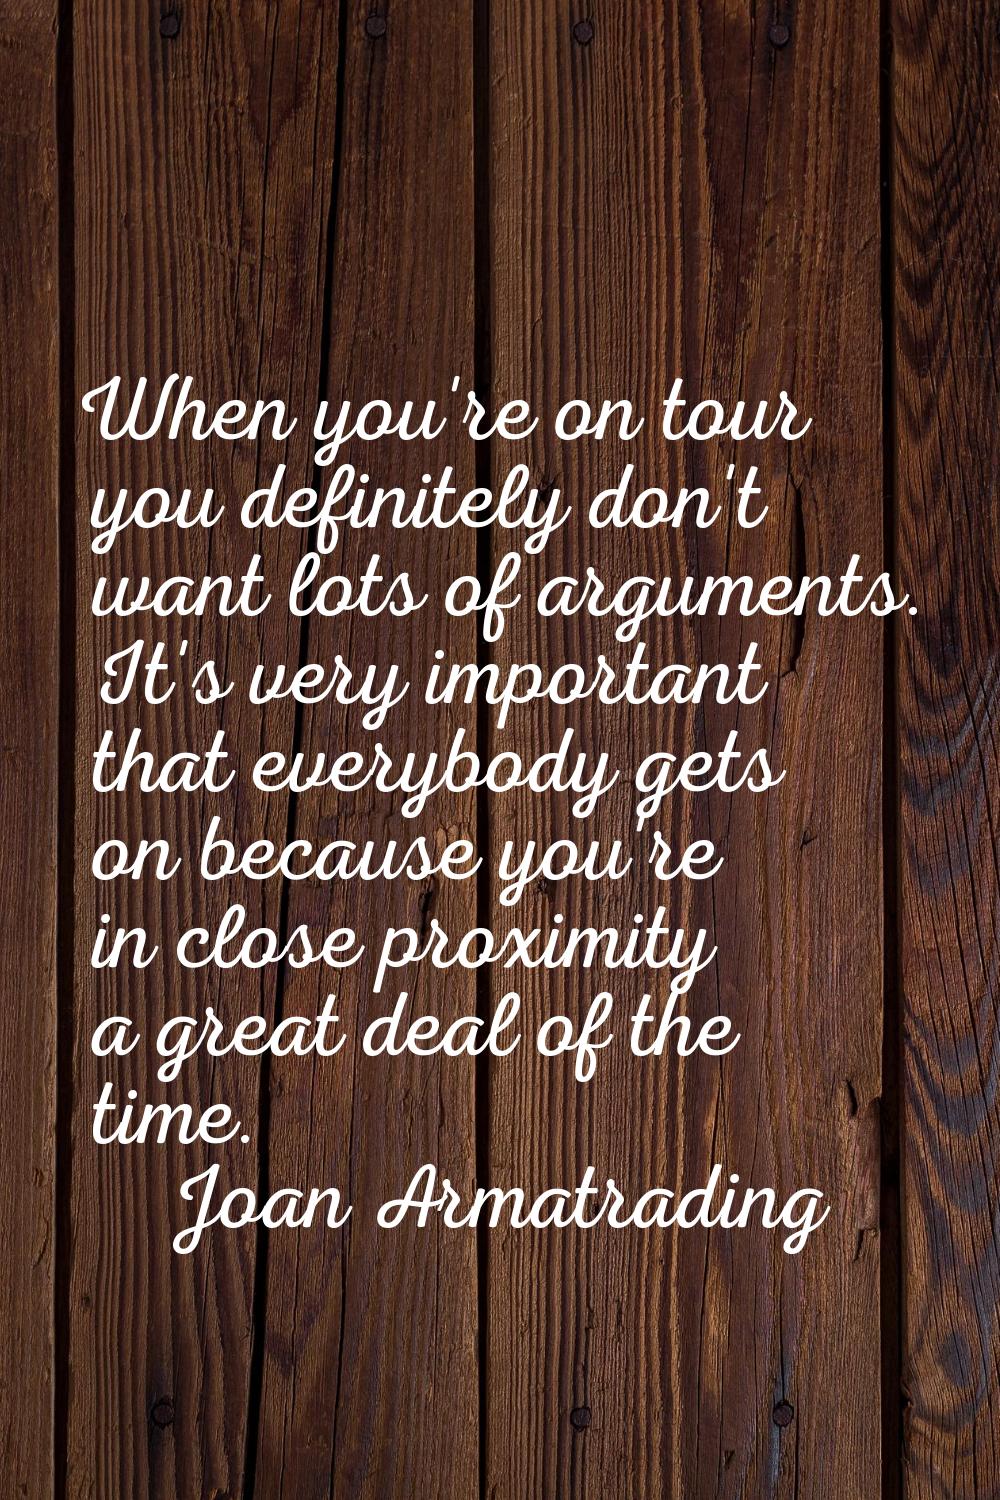 When you're on tour you definitely don't want lots of arguments. It's very important that everybody